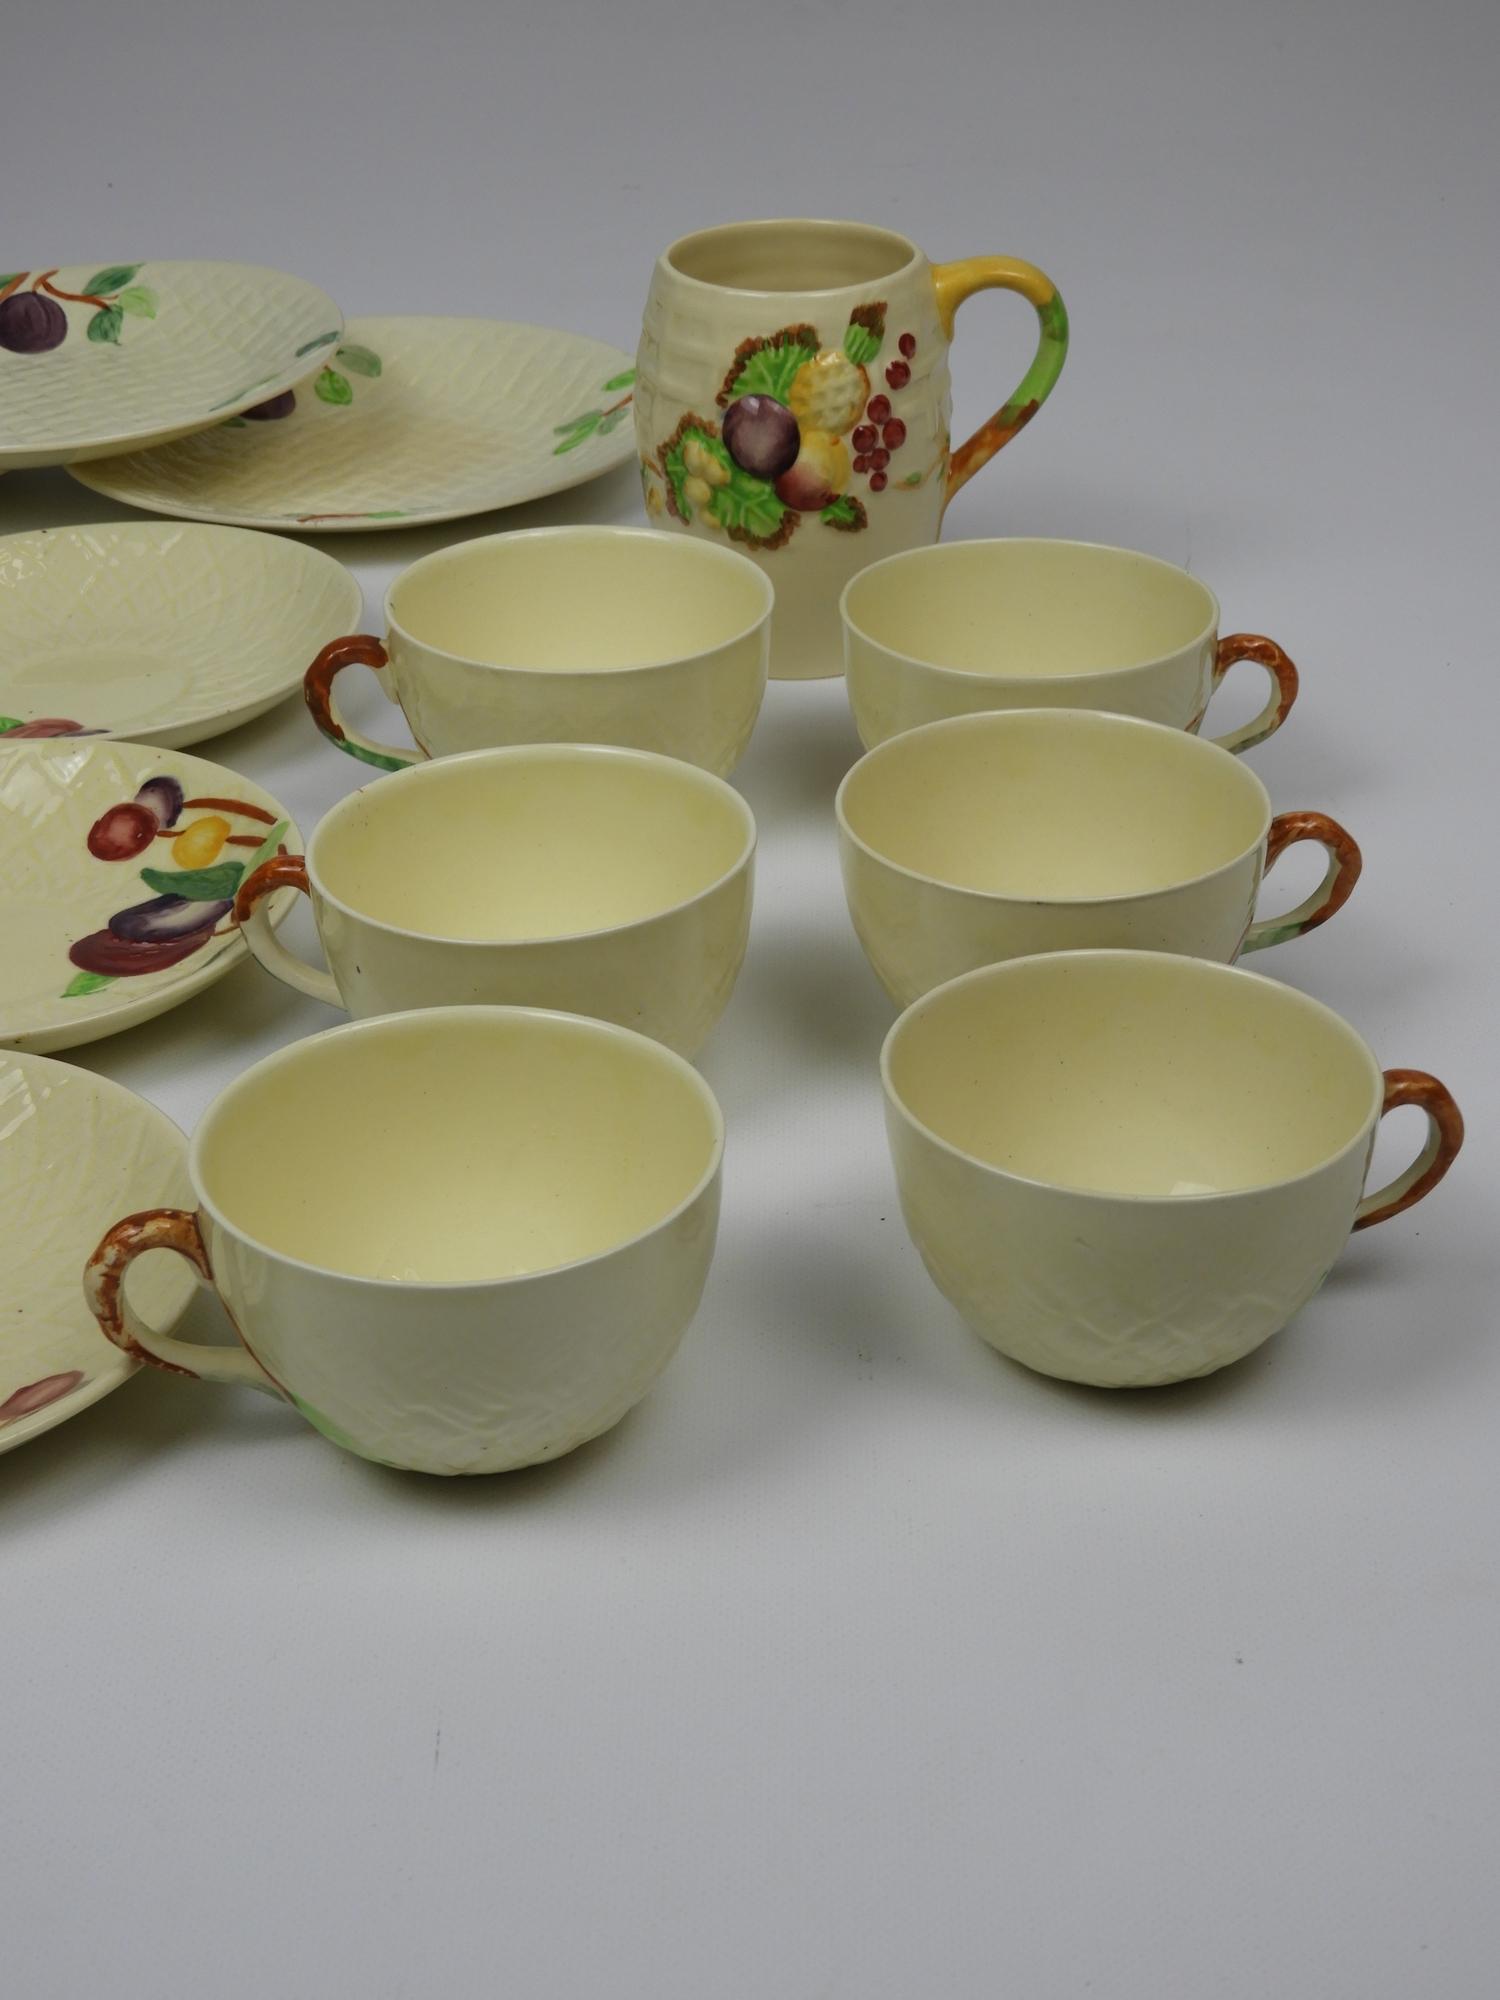 Royal Staffordshire Pottery - A.J Wilkinson, Clarice Cliff Design Tea Cups, Saucers, Plates and Mug - Image 3 of 5